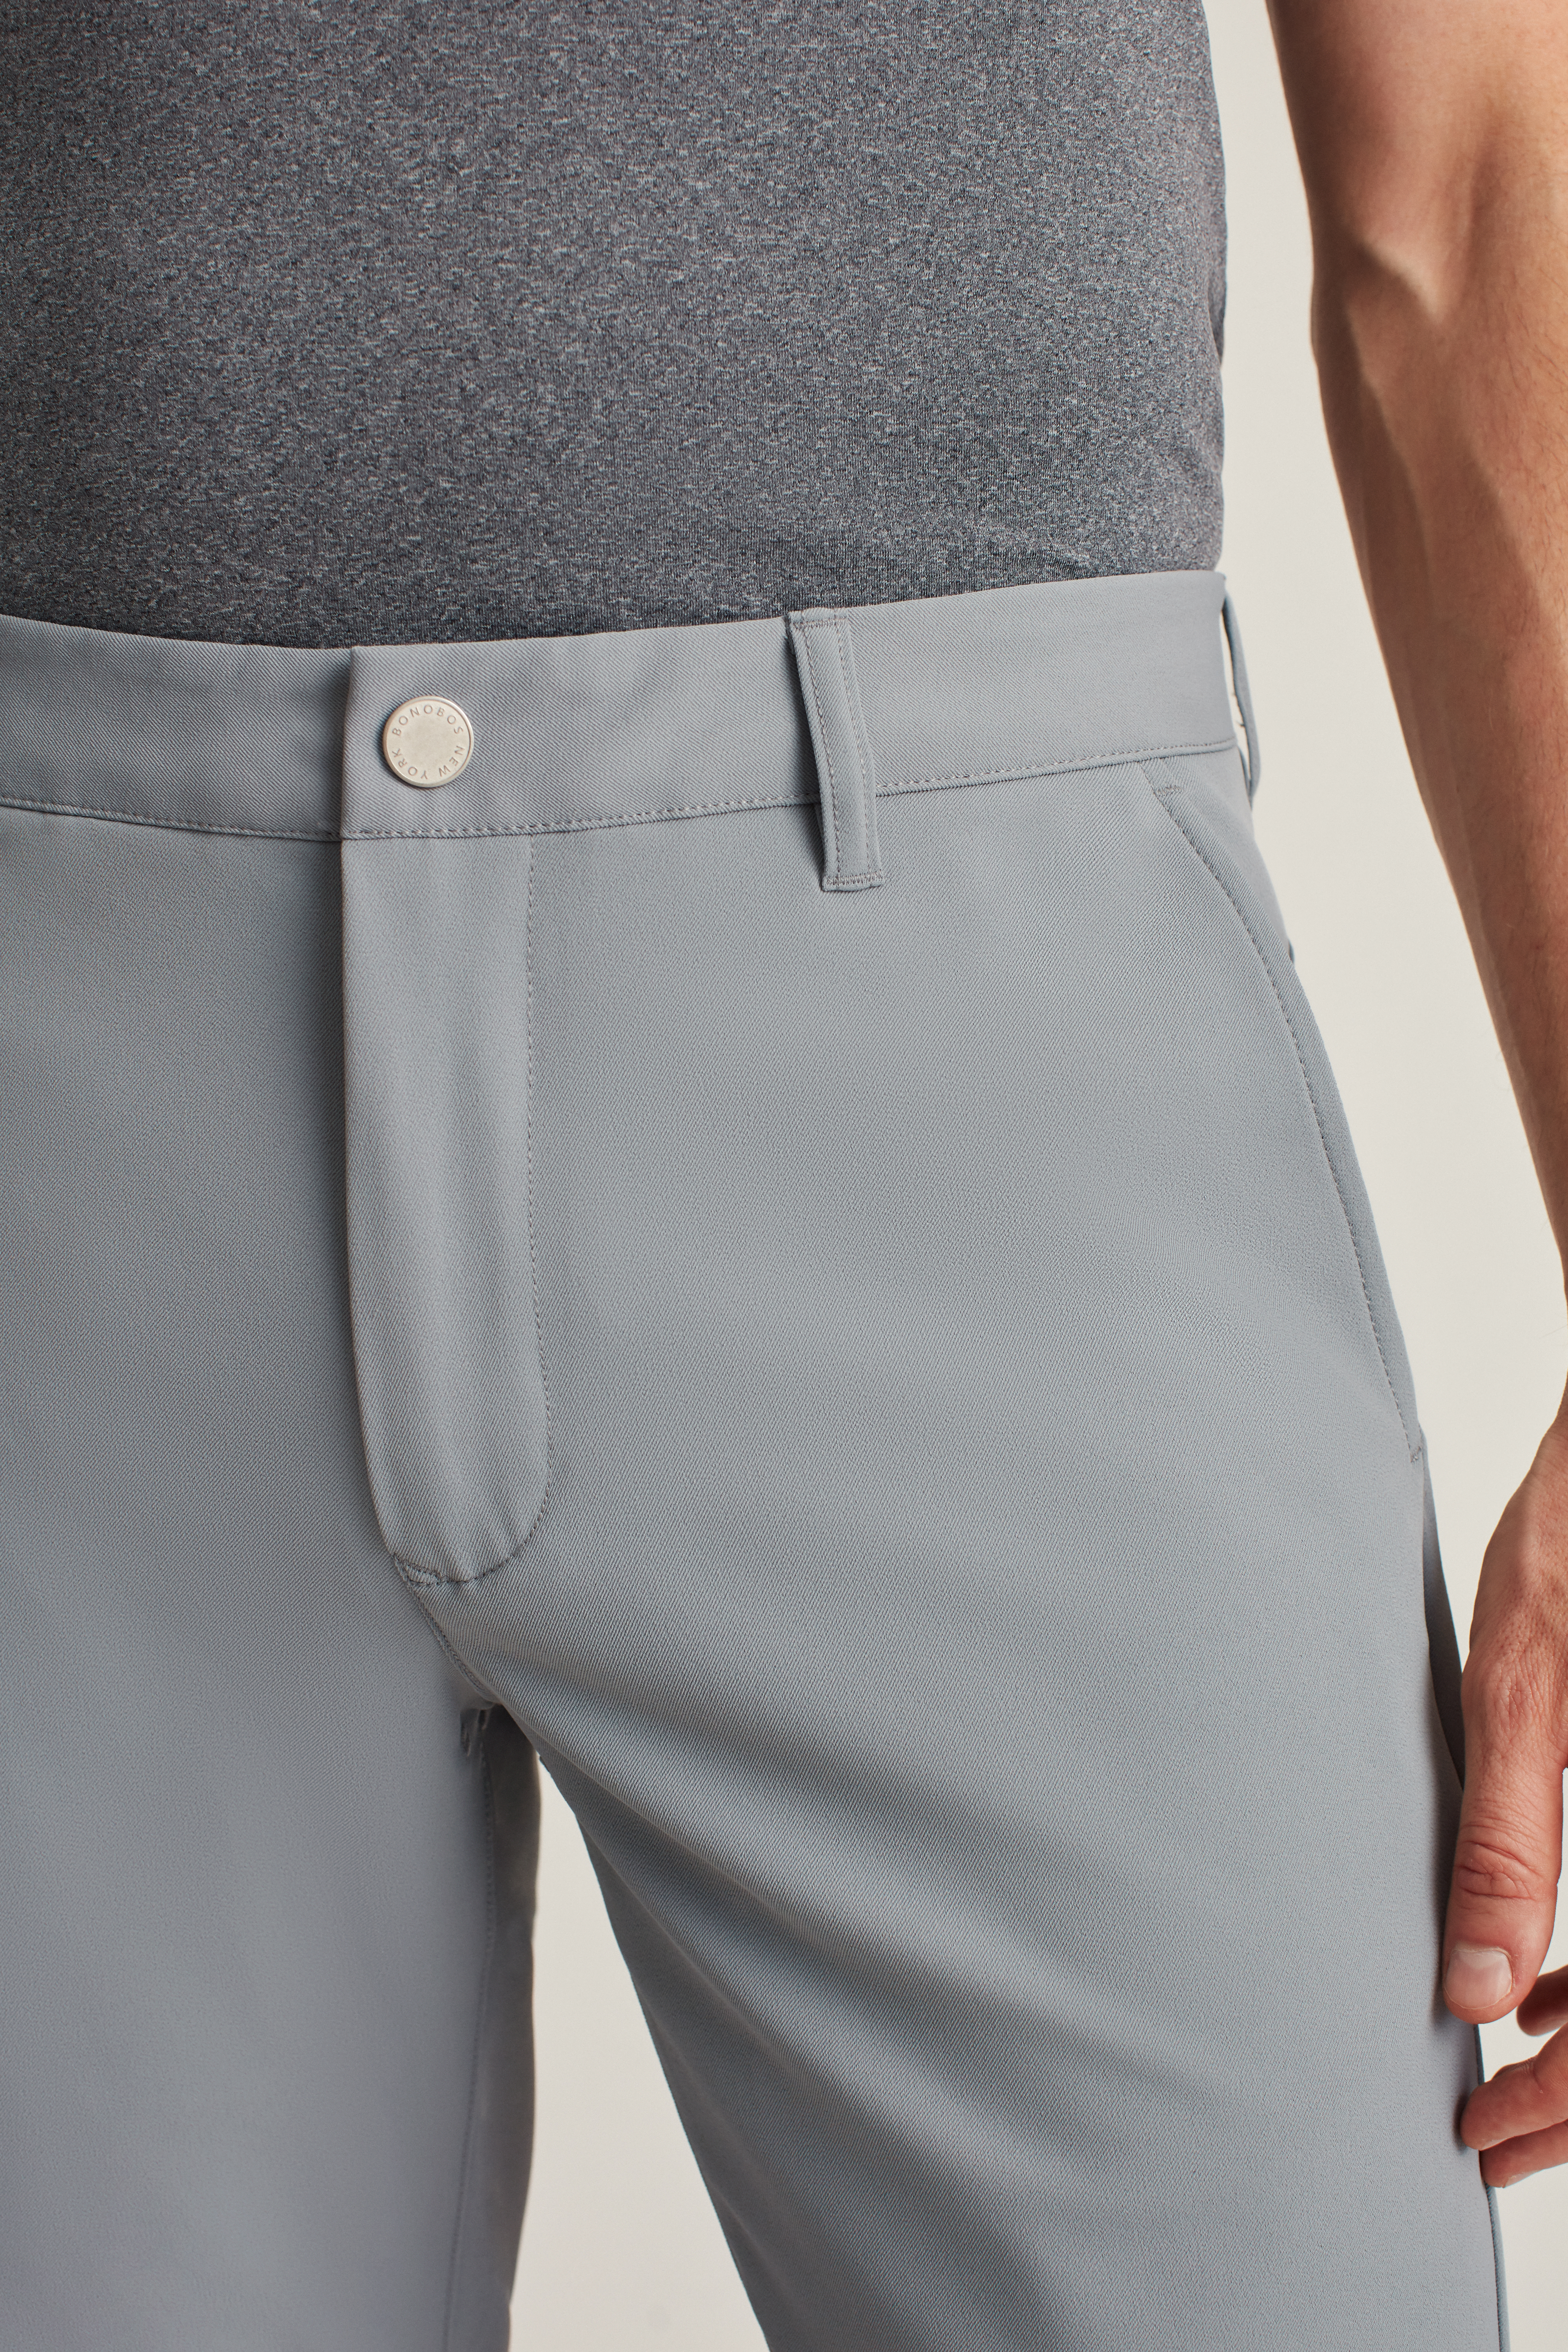 Bonobos - The Must Have Golf Pants - Golficity